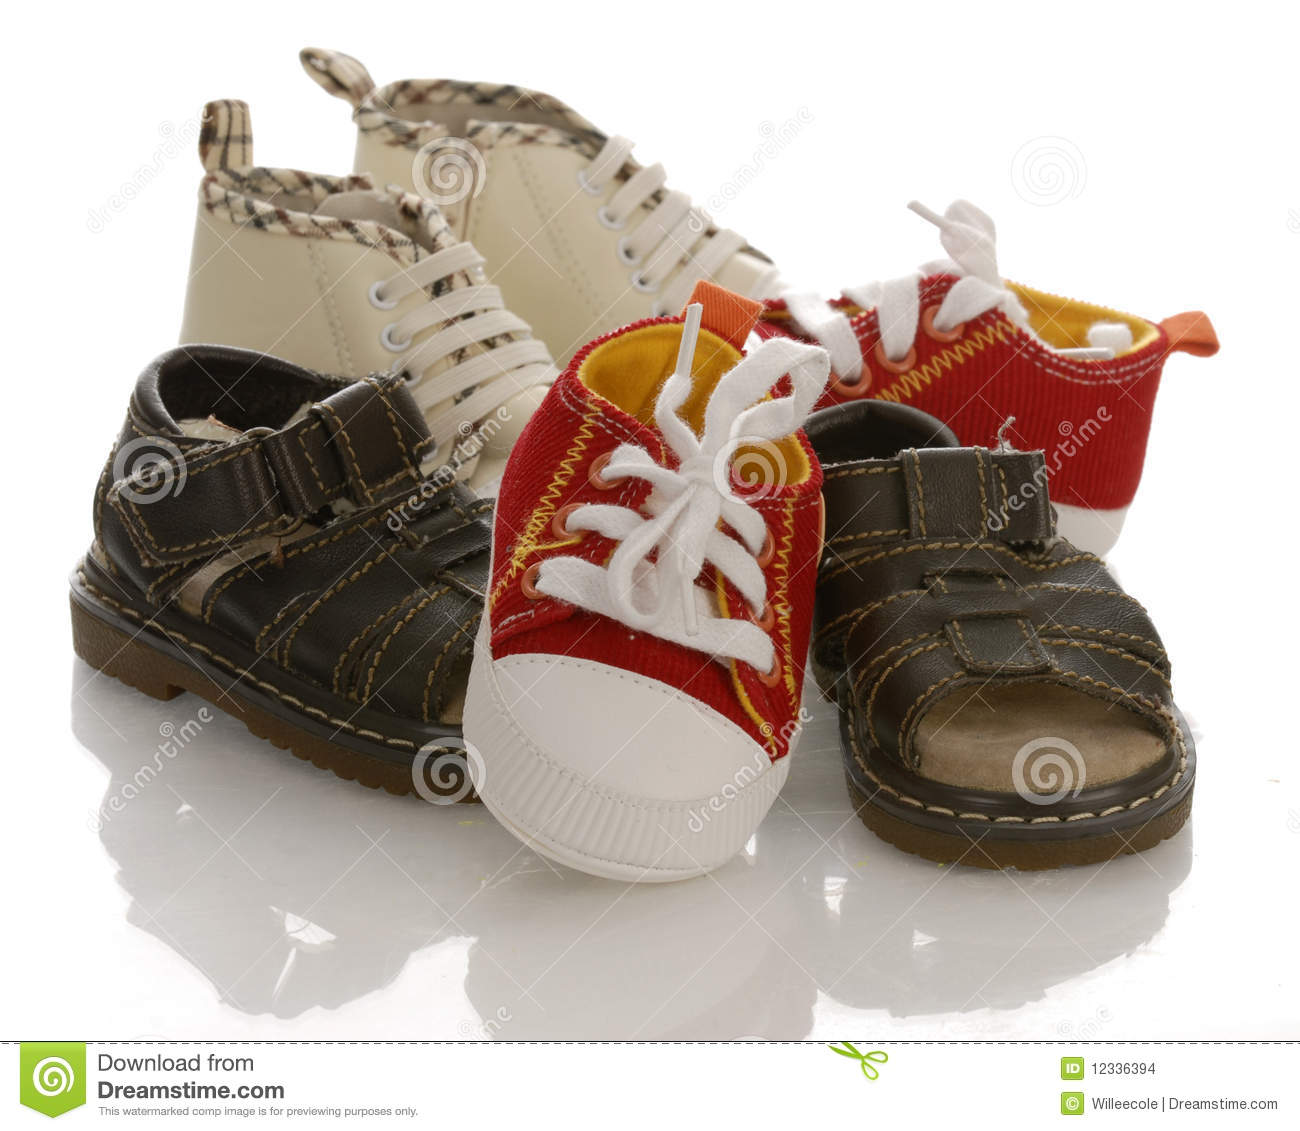 Pile Of Baby Or Infant Shoes With Reflection On White Background